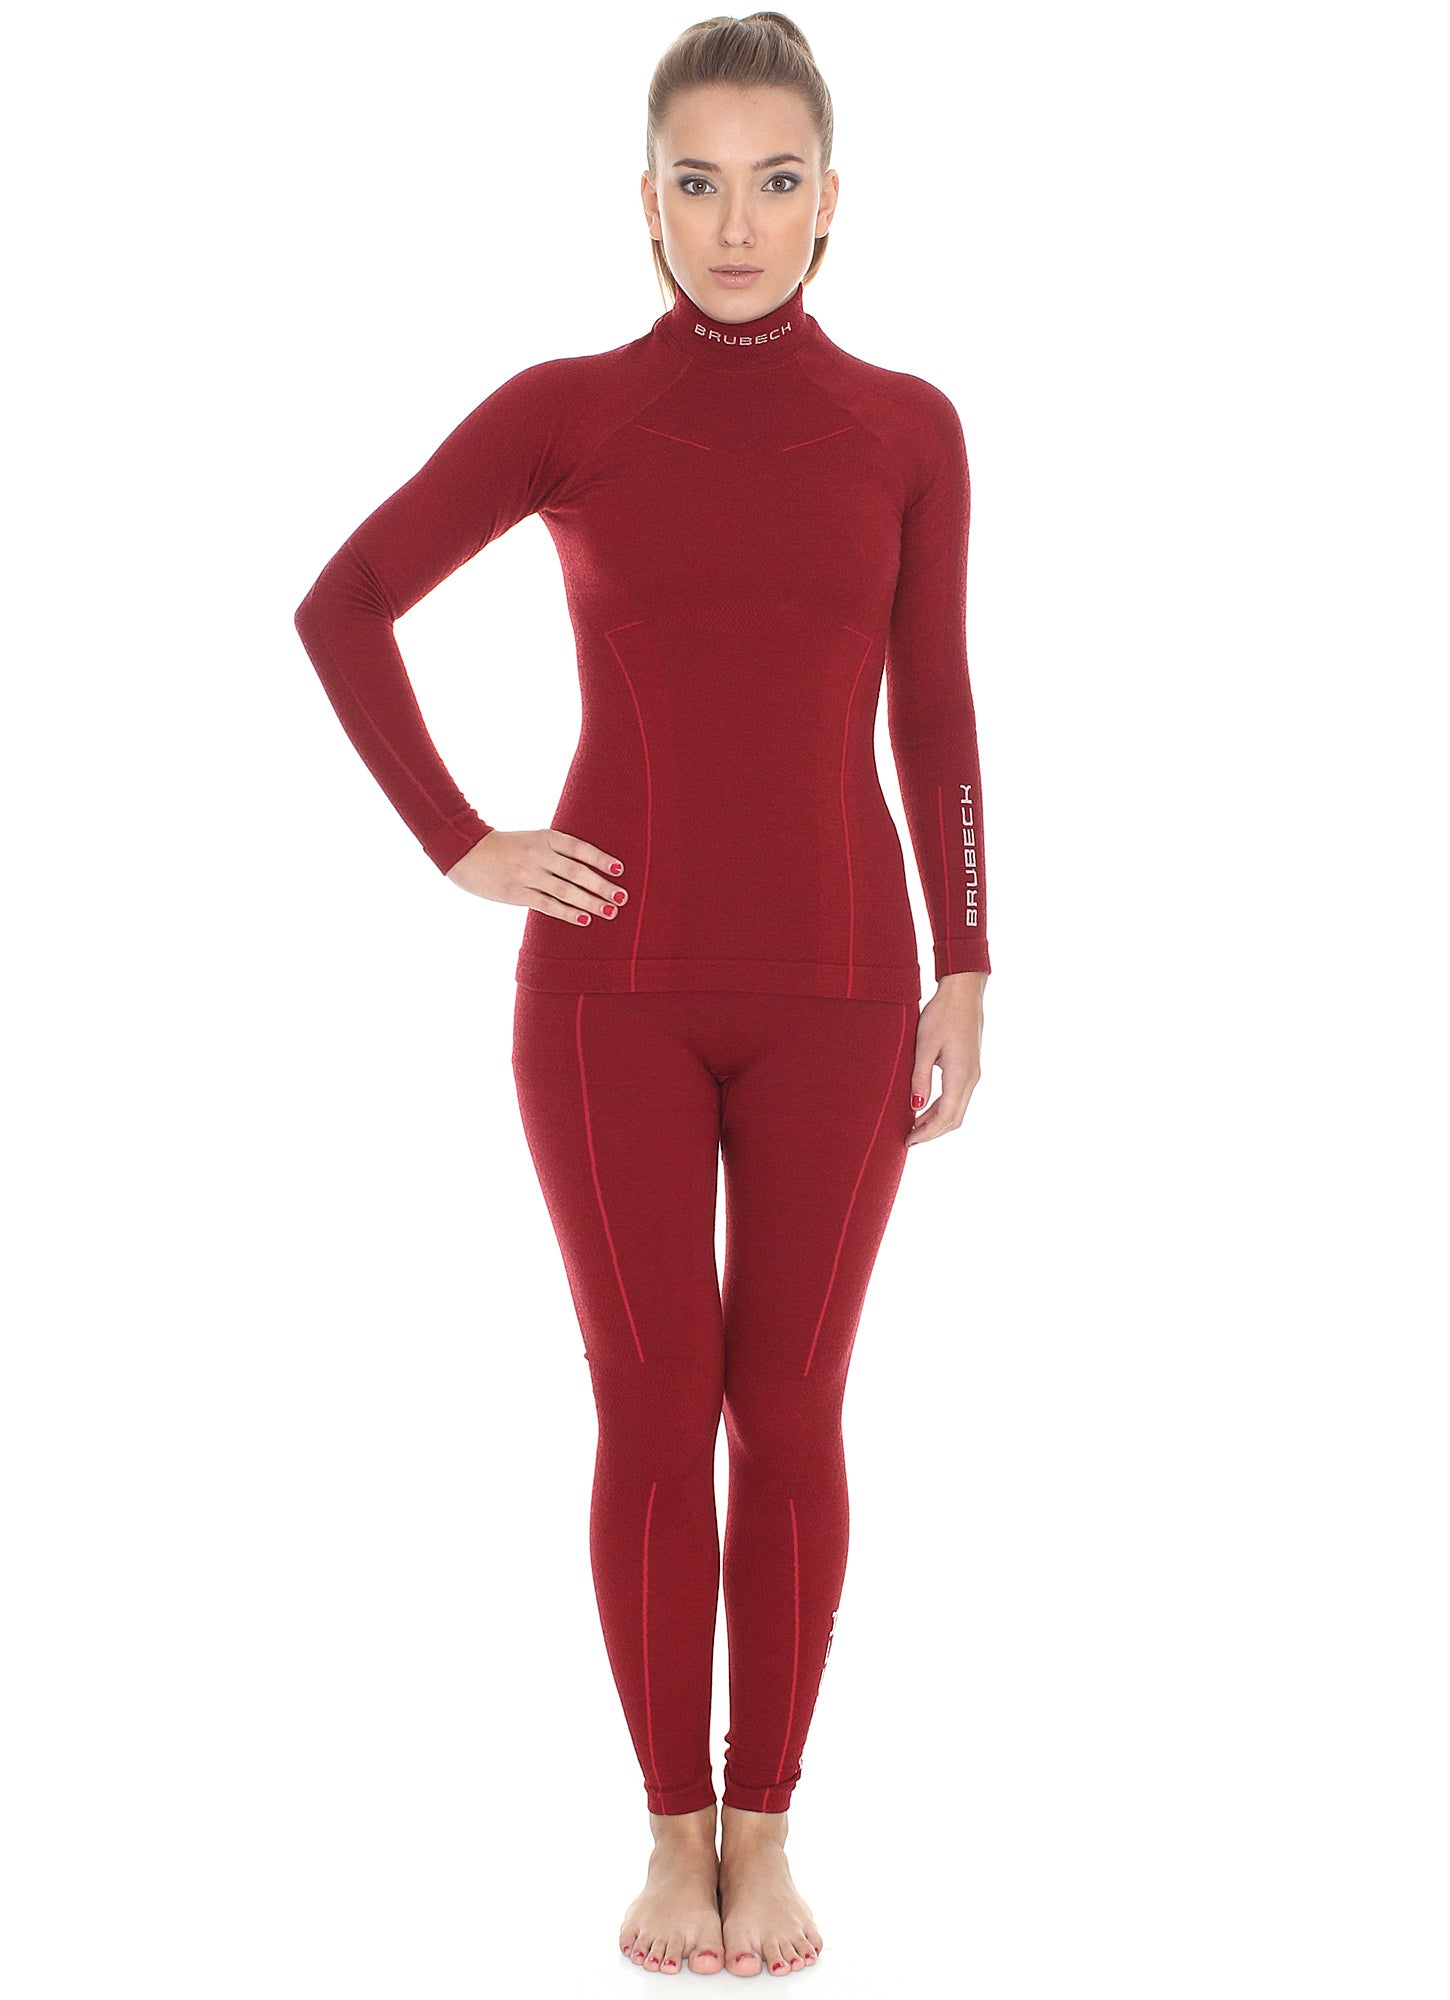 Women's EXTREME WOOL monochromatic red leggings and matching long-sleeve set. With lighter red shape enhancing lines flowing down the sides of the garments. 